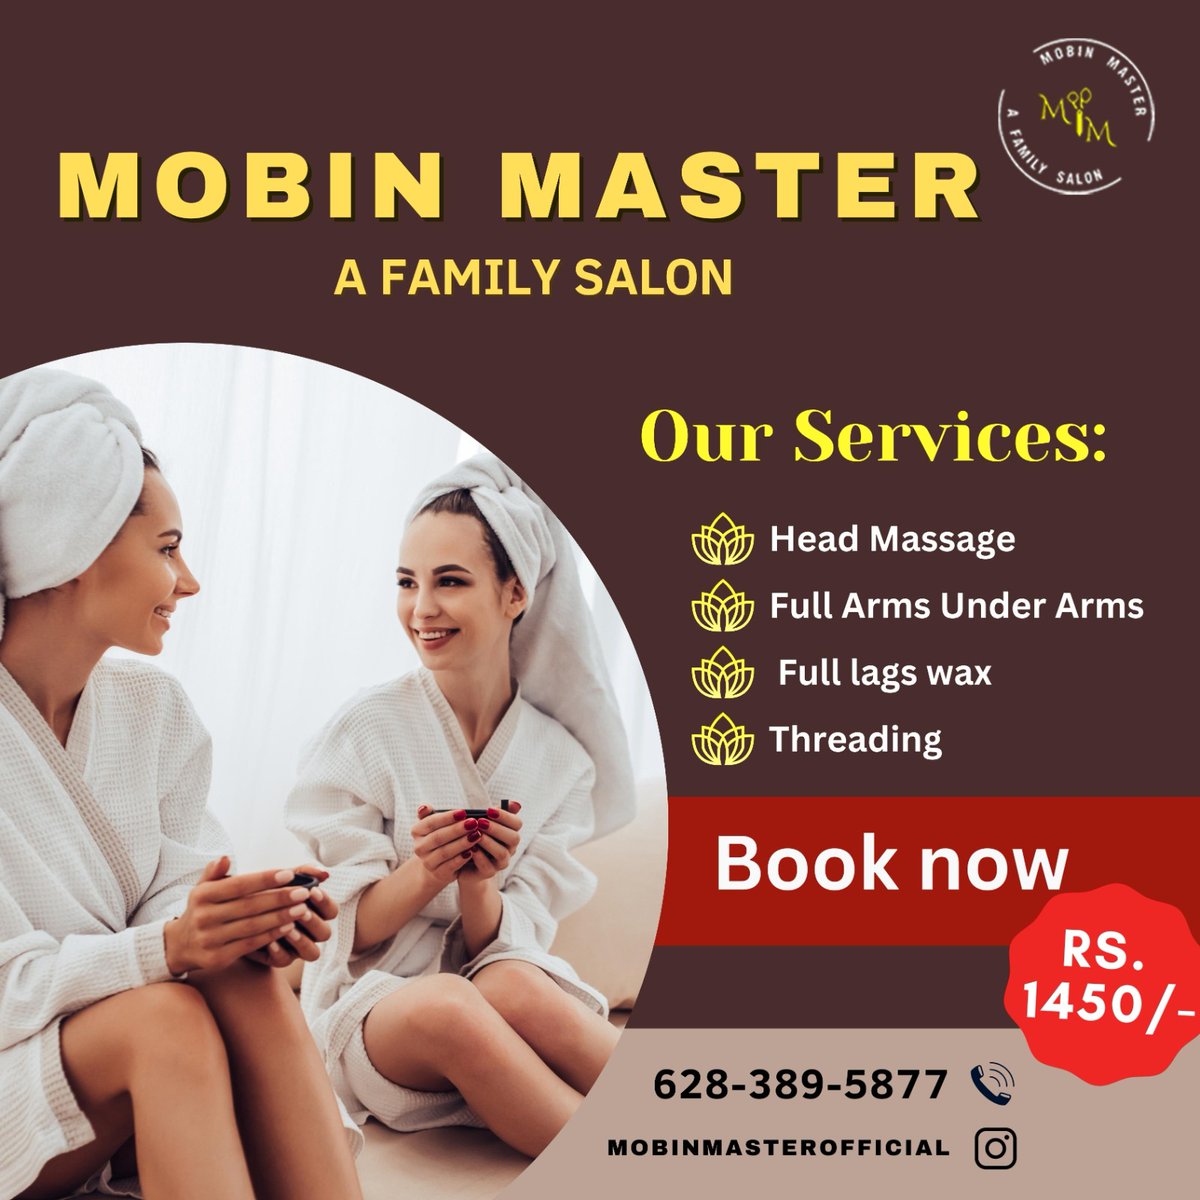 🌟✂️ Unleash Your Inner Beauty with Mobin Master's Family Salon! ✂️🌟

🌟 Book an appointment with us and experience:

📞 Call us at 6283895877

#MobinMasterSalon #FamilySalon #BeautyServices #GroomingExperts #BeautyTherapy #HairAndBeauty #PamperingSession #LookAndFeelGreat